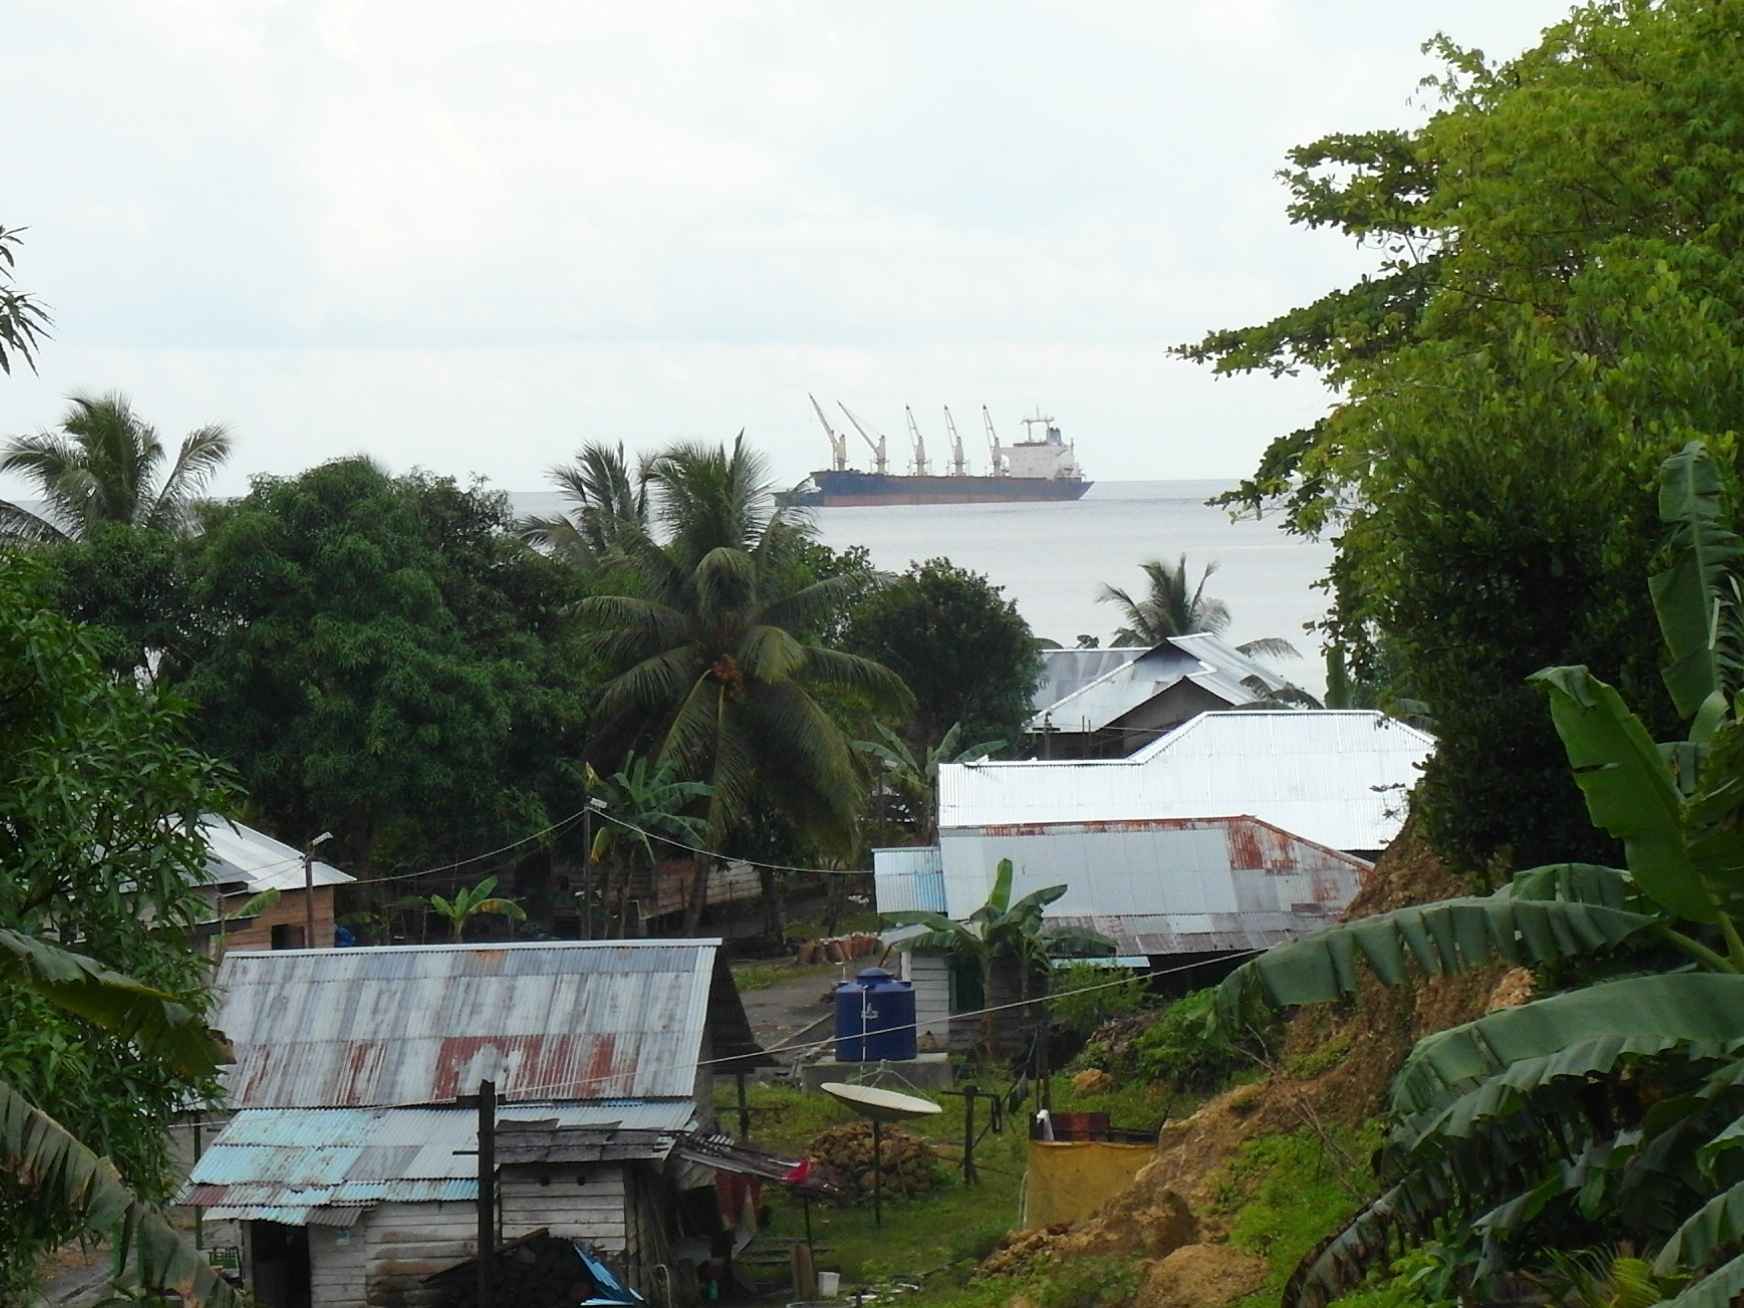 A Chinese ship waits to carry raw nickel out of Weda Bay